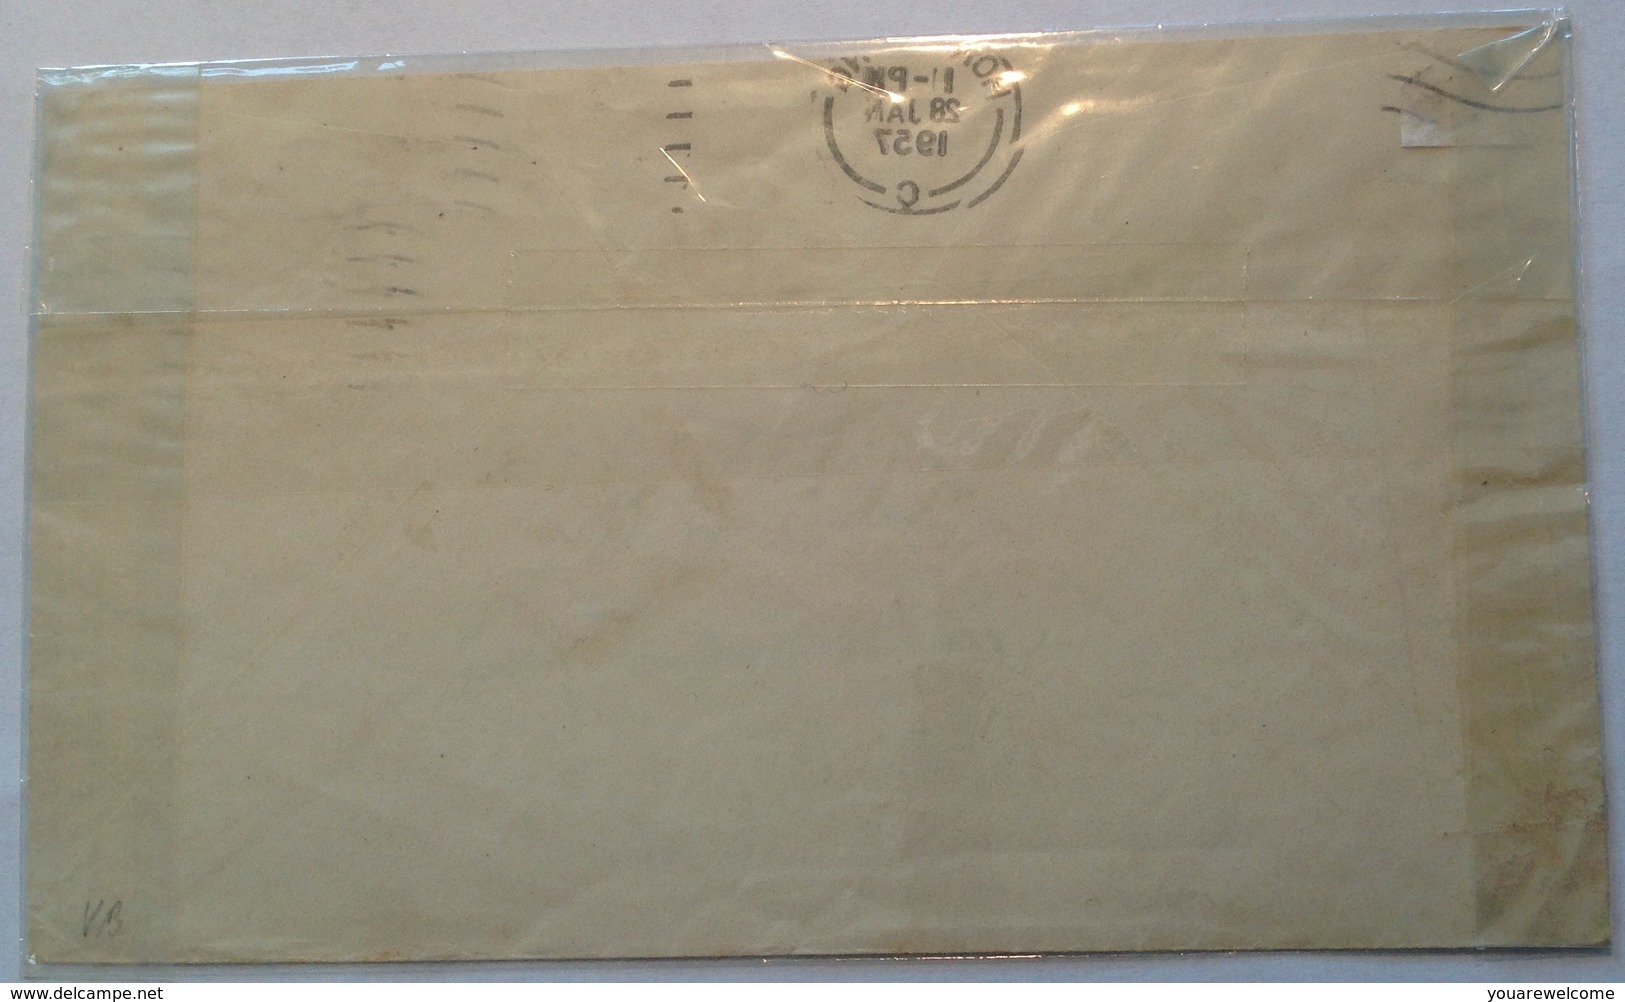 Hong Kong 1957 REAL MIXED FRANKING On PAQUEBOT SHIP MAIL COVER Norway (Haugesund Brief Lettre Norwegen China Chine - Brieven En Documenten